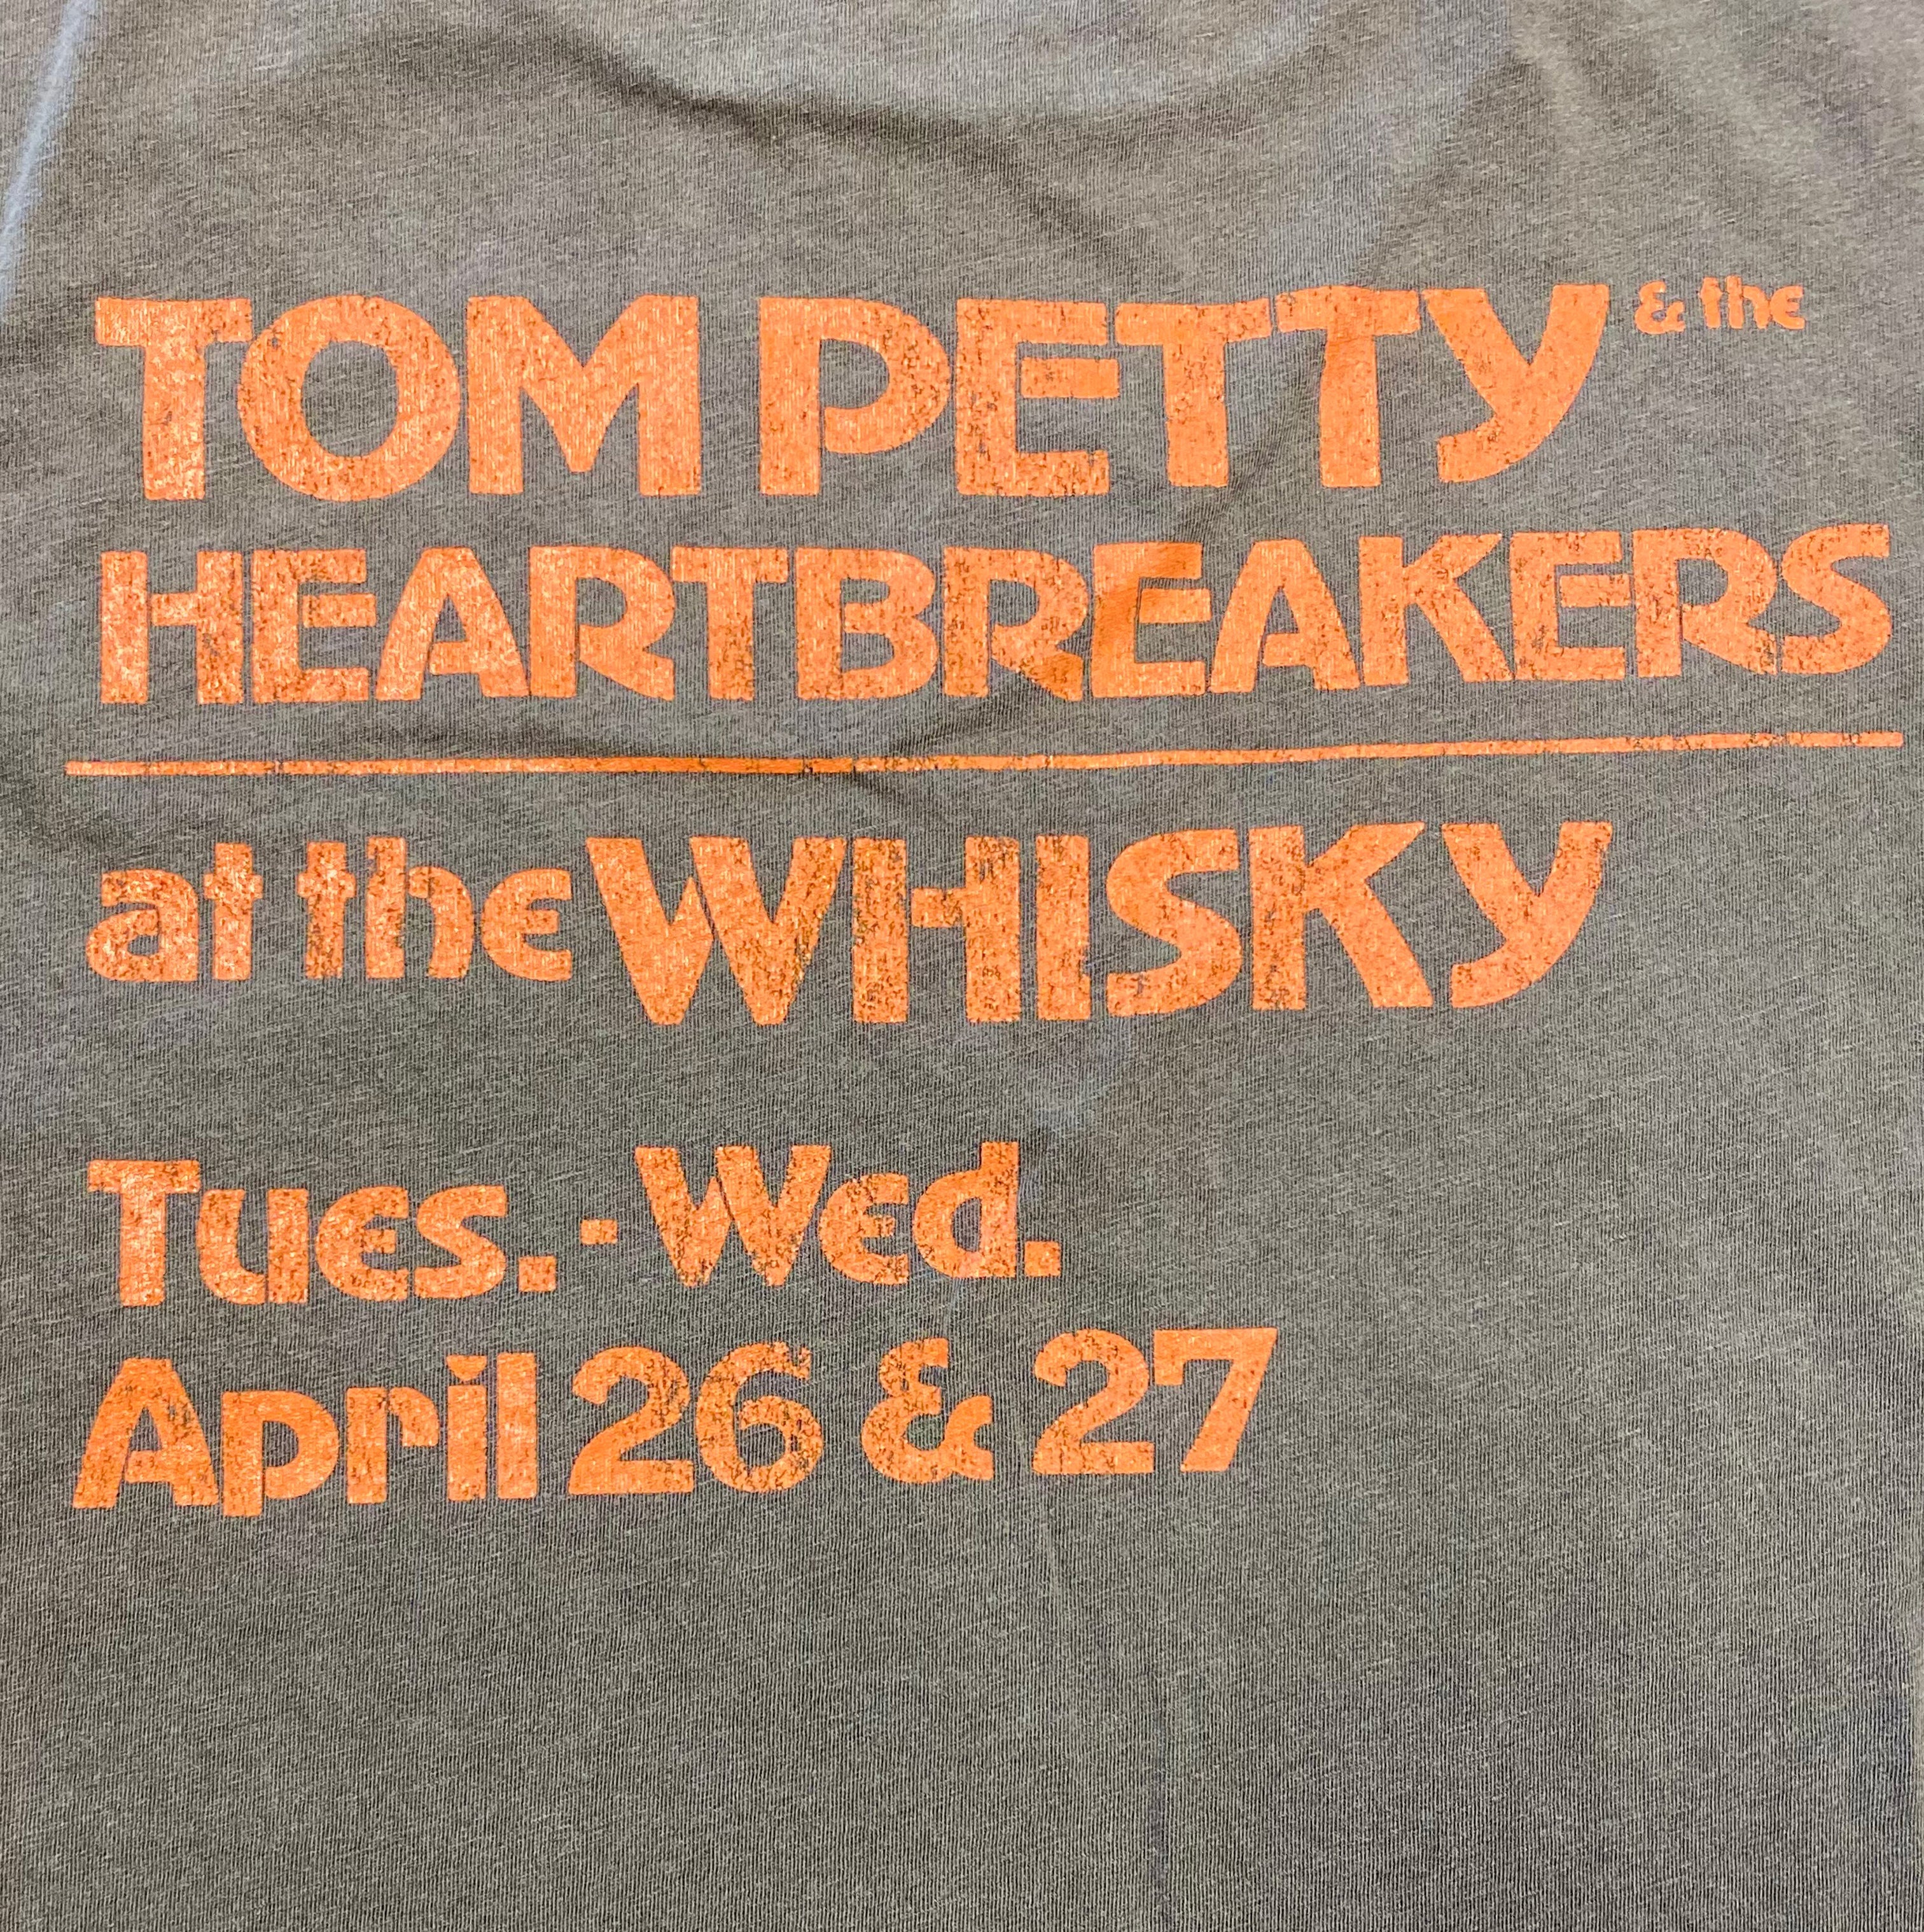 Tom Petty and the Heartbreakers at the Whiskey